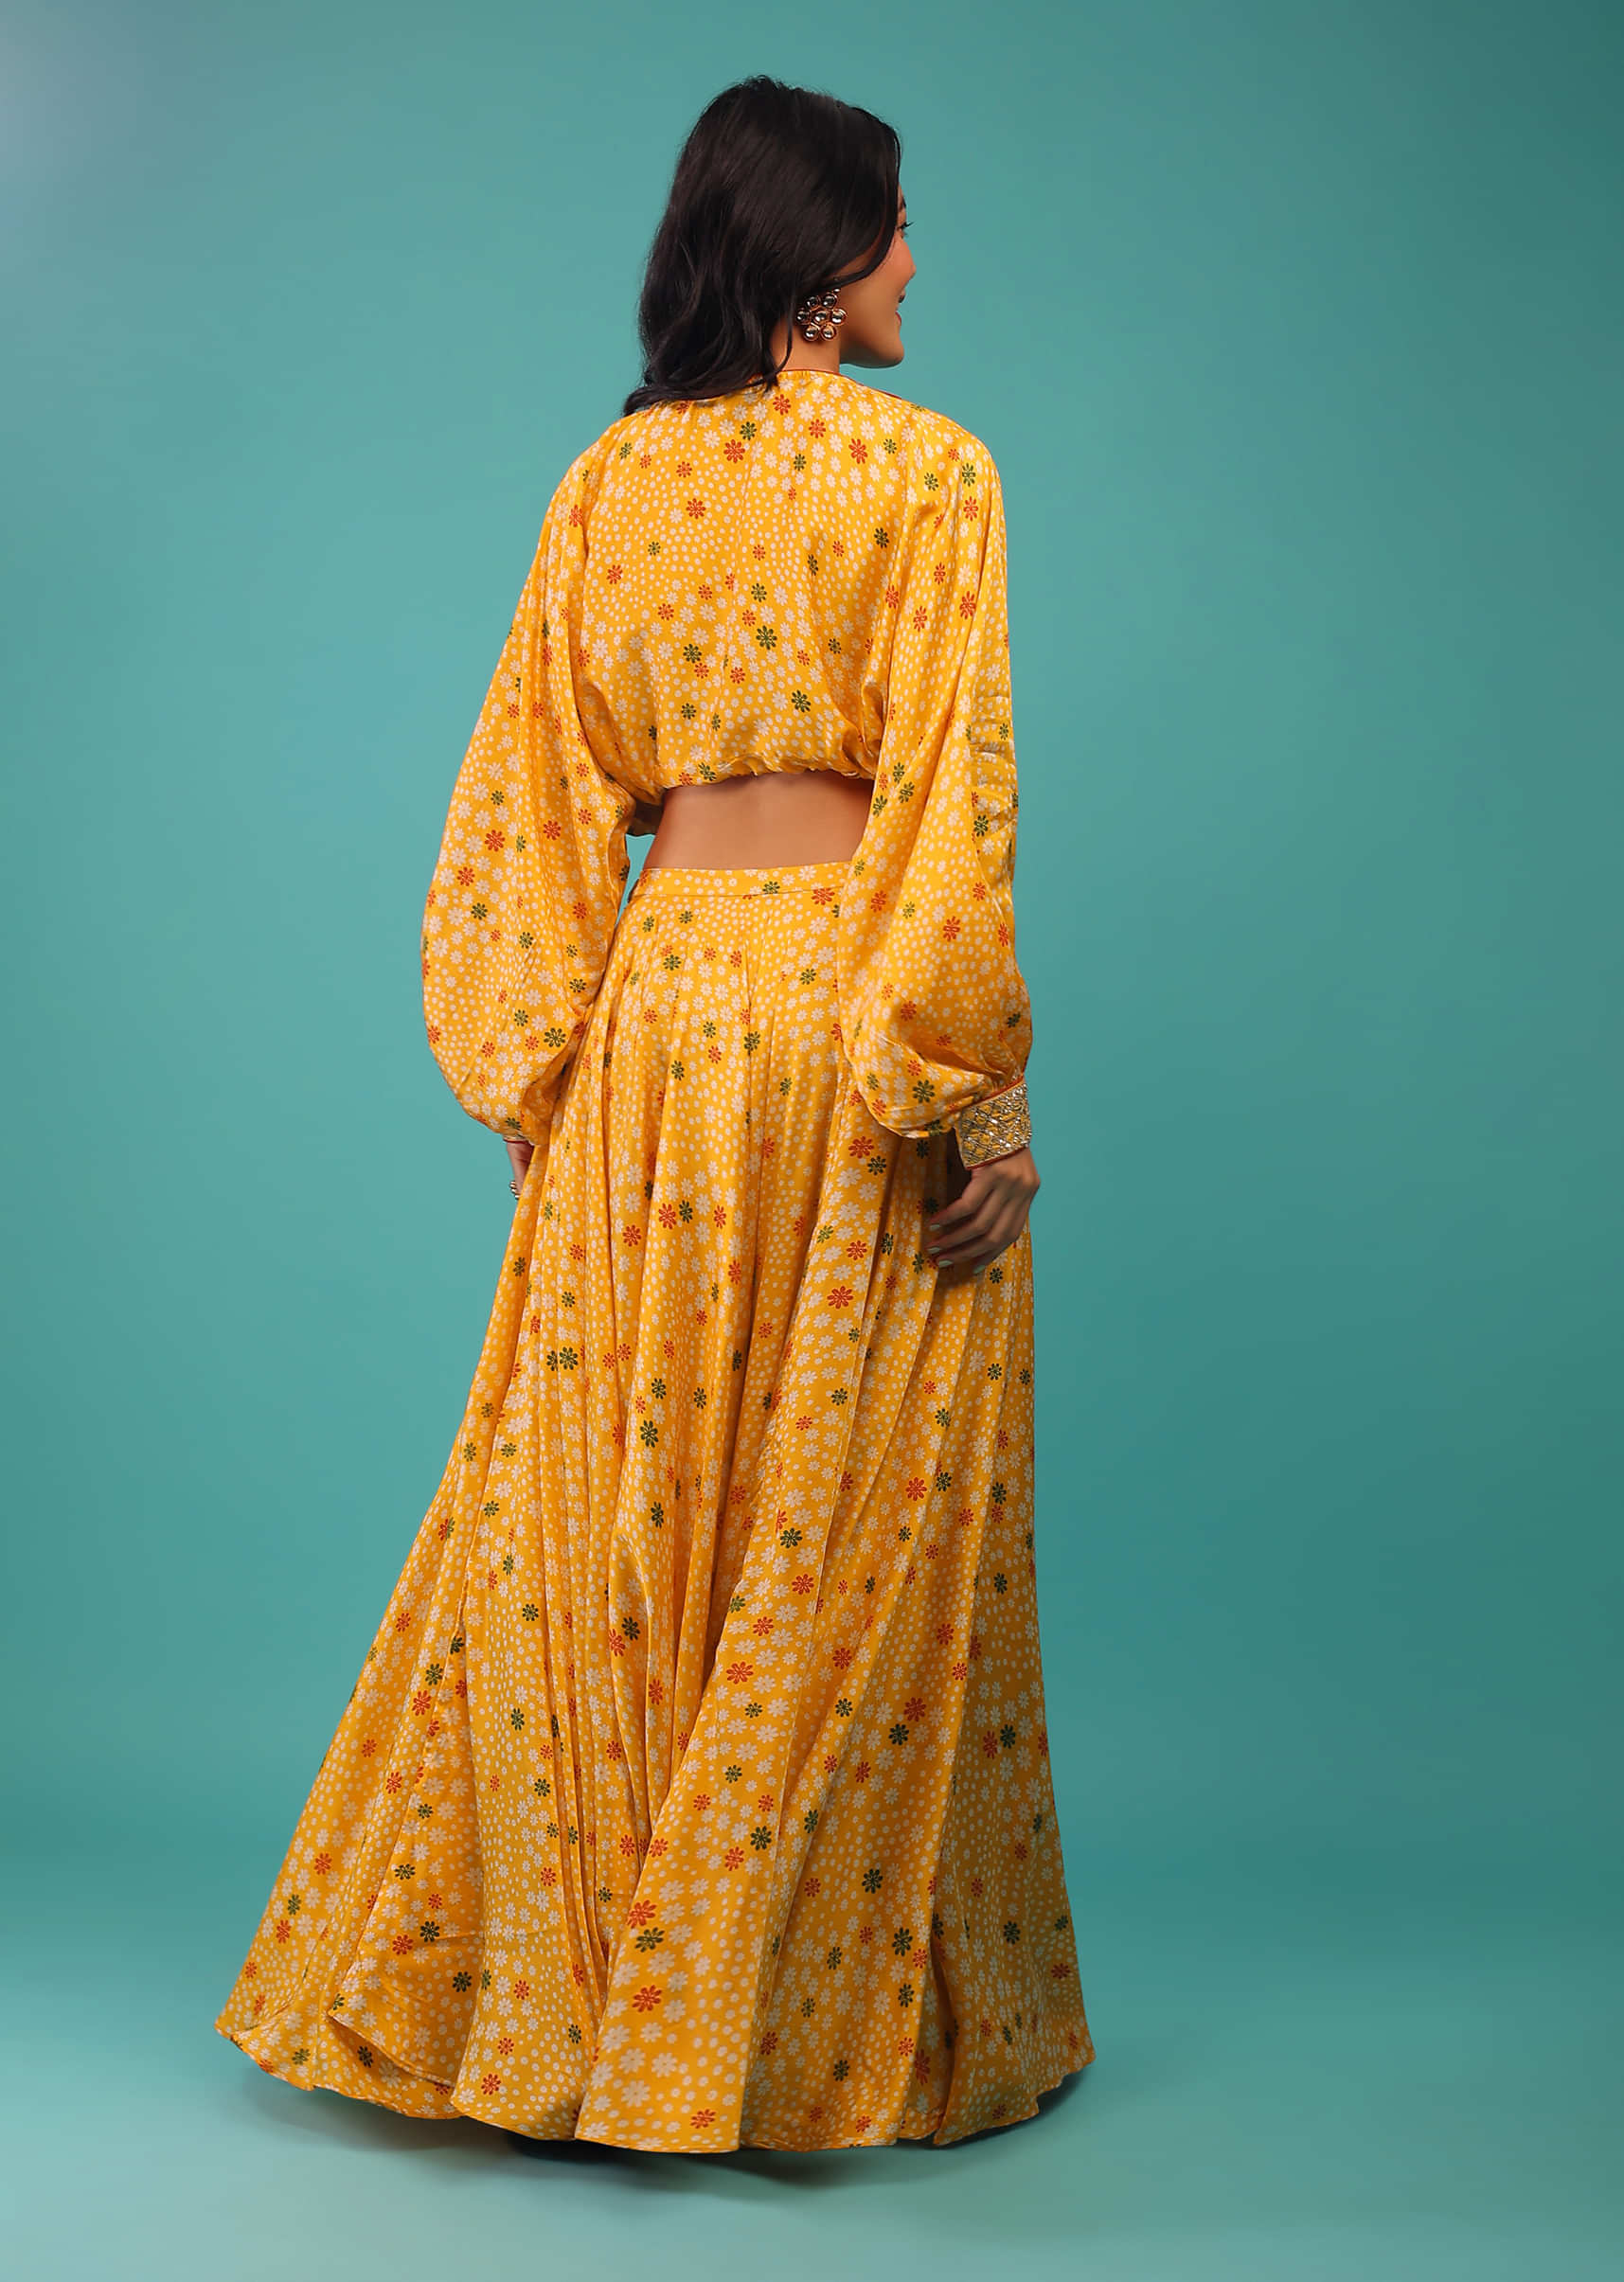 Artisan's Yellow Crop Top And Skirt With Floral Prints